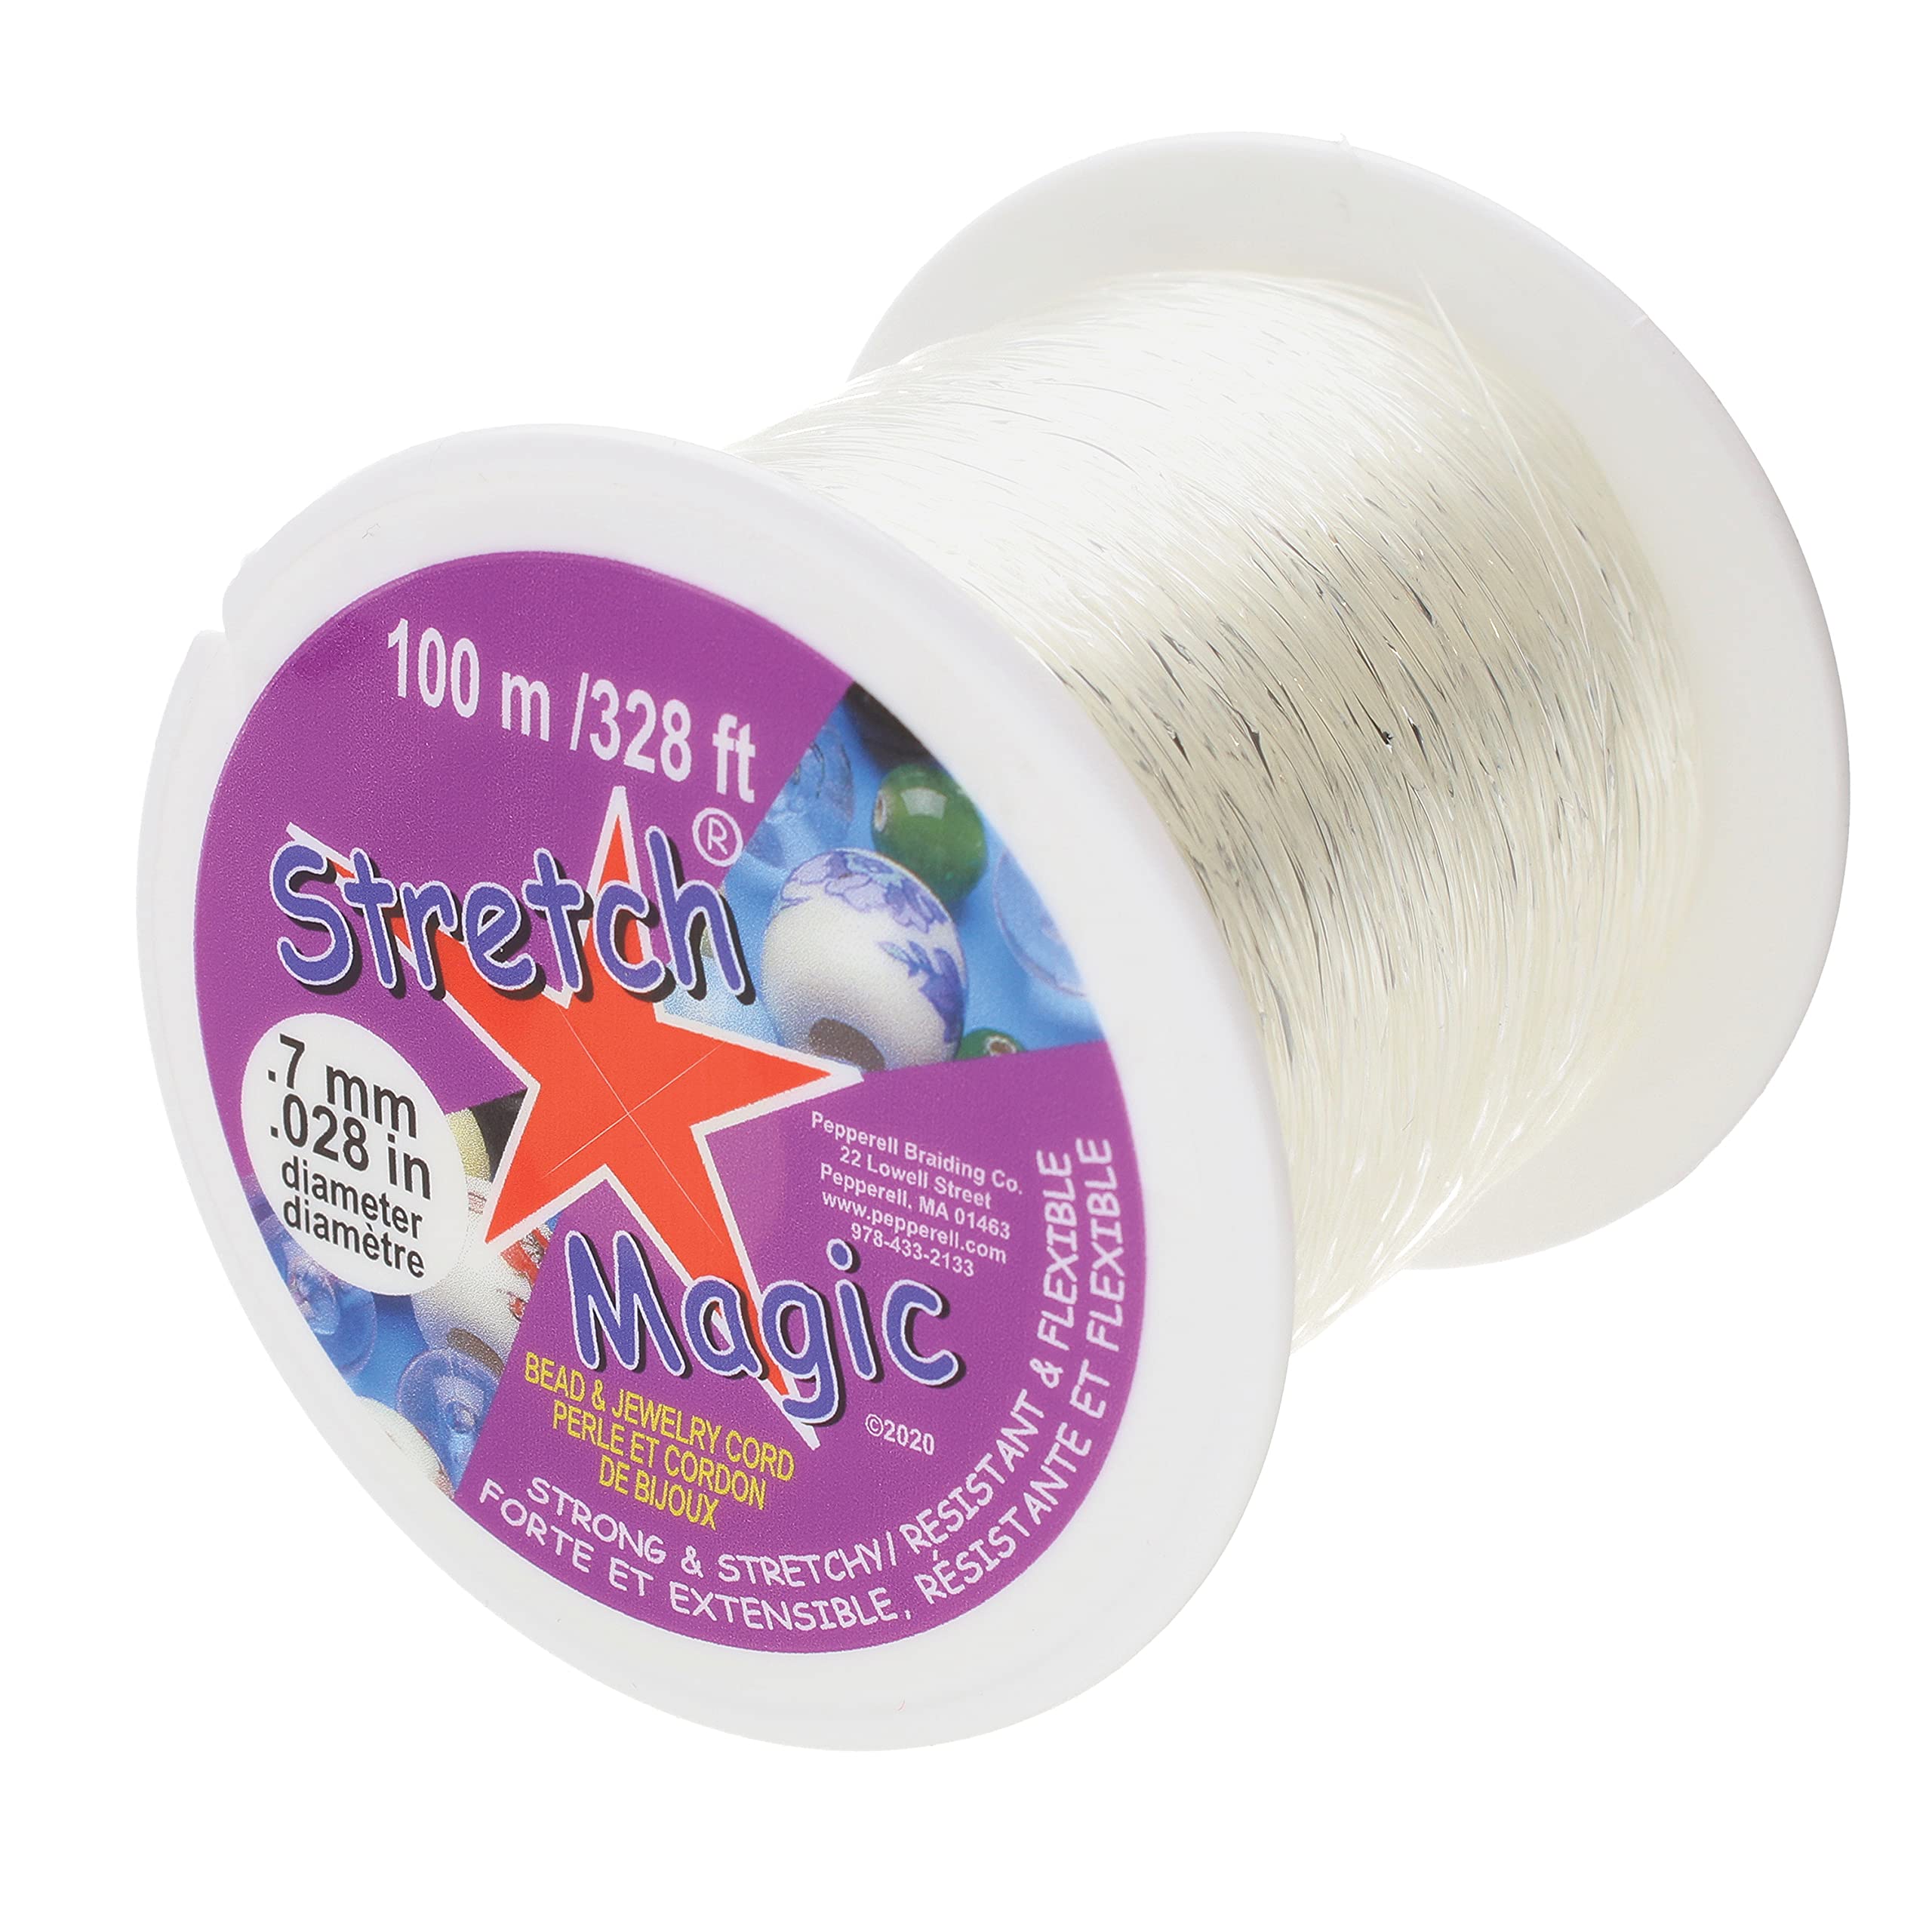 Stretch Magic Bead & Jewelry Cord - Strong & Stretchy, Easy to Knot - Clear  Color - 0.7mm diameter - 100-meter (328 ft) spool - Elastic String for  making beaded jewelry